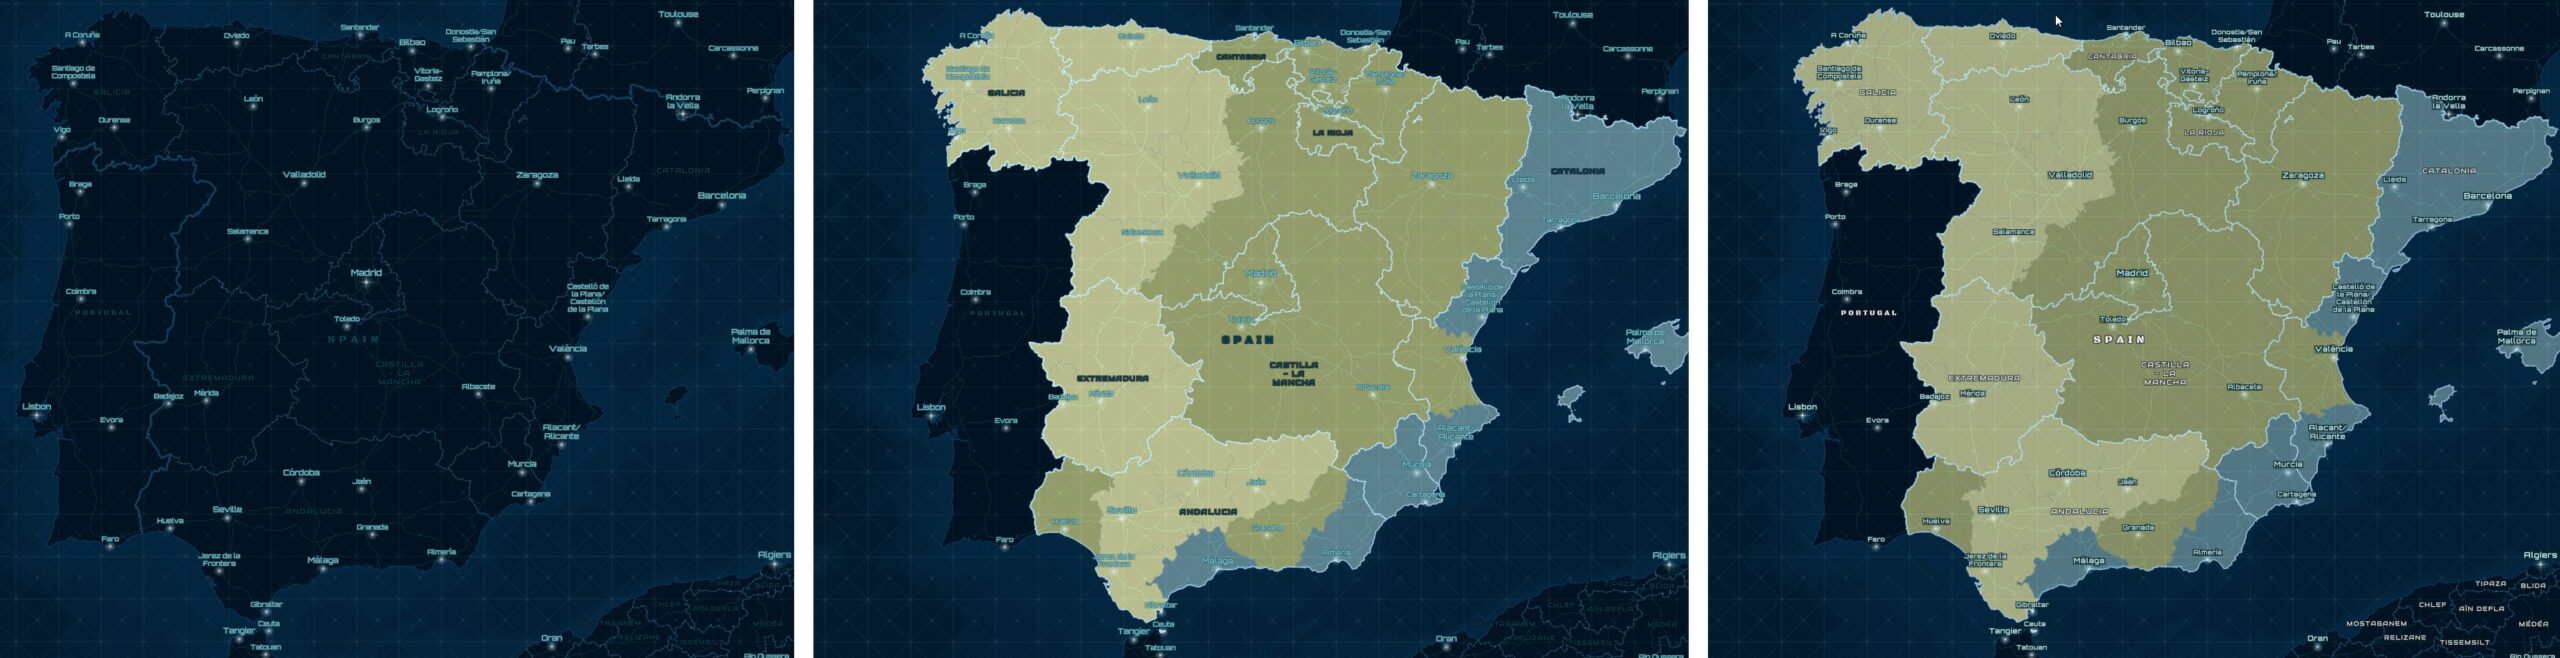 3 maps of Spain, showing the NOva basemapp and adjustments to work with a subject map